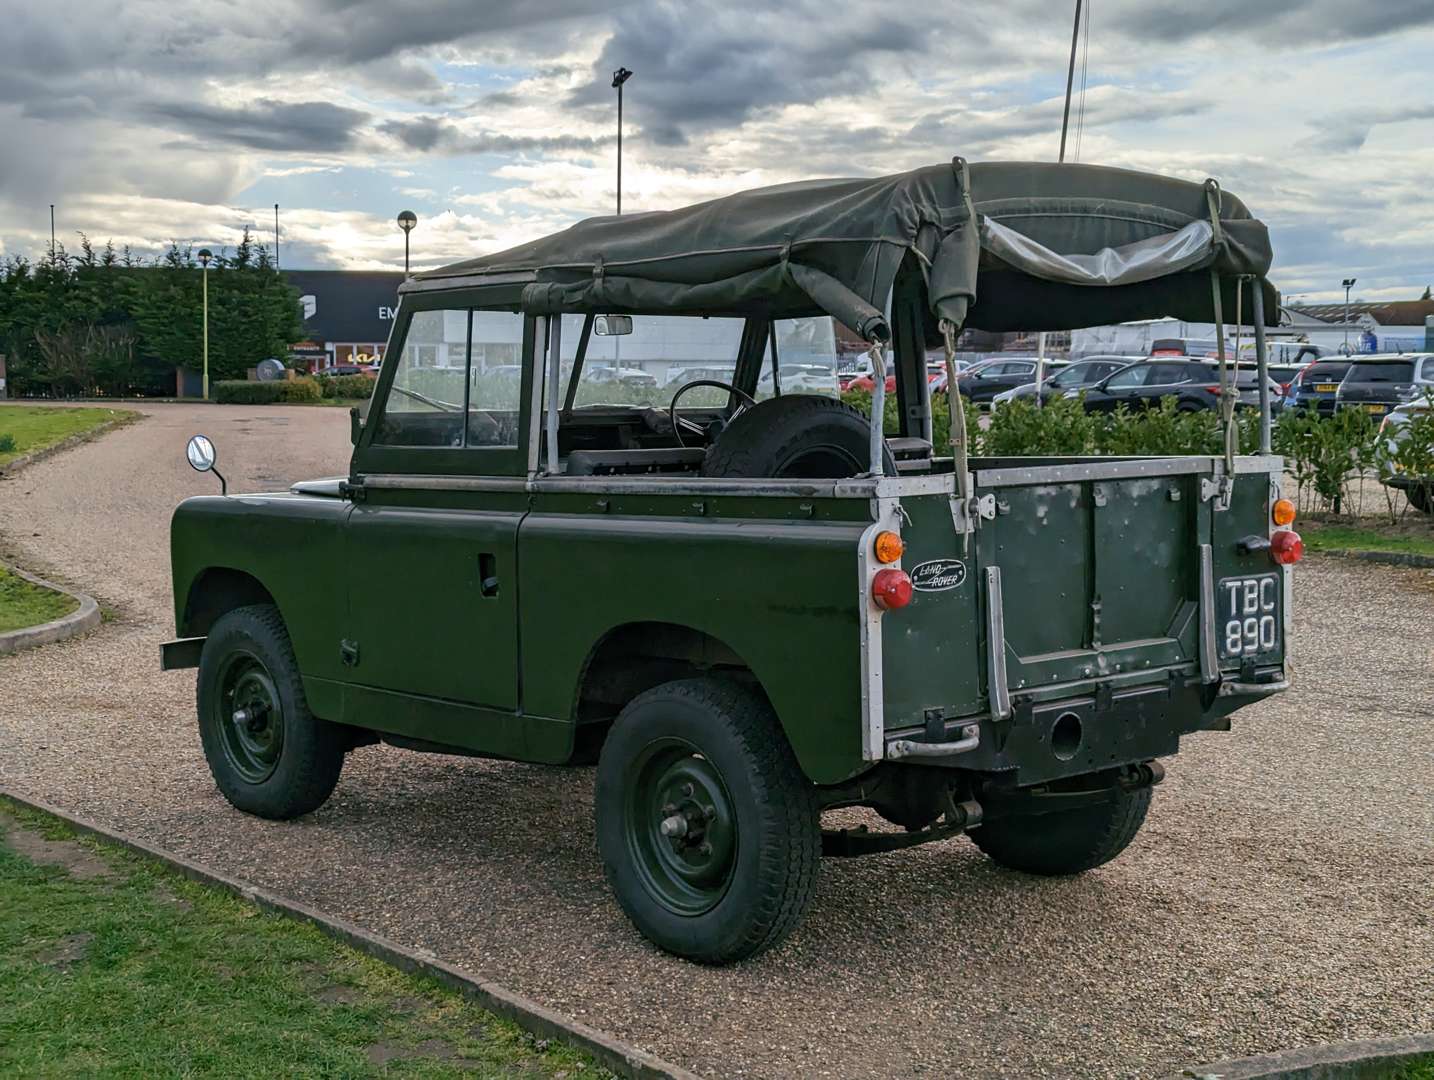 1958 LAND ROVER SWB SERIES II - Image 5 of 26